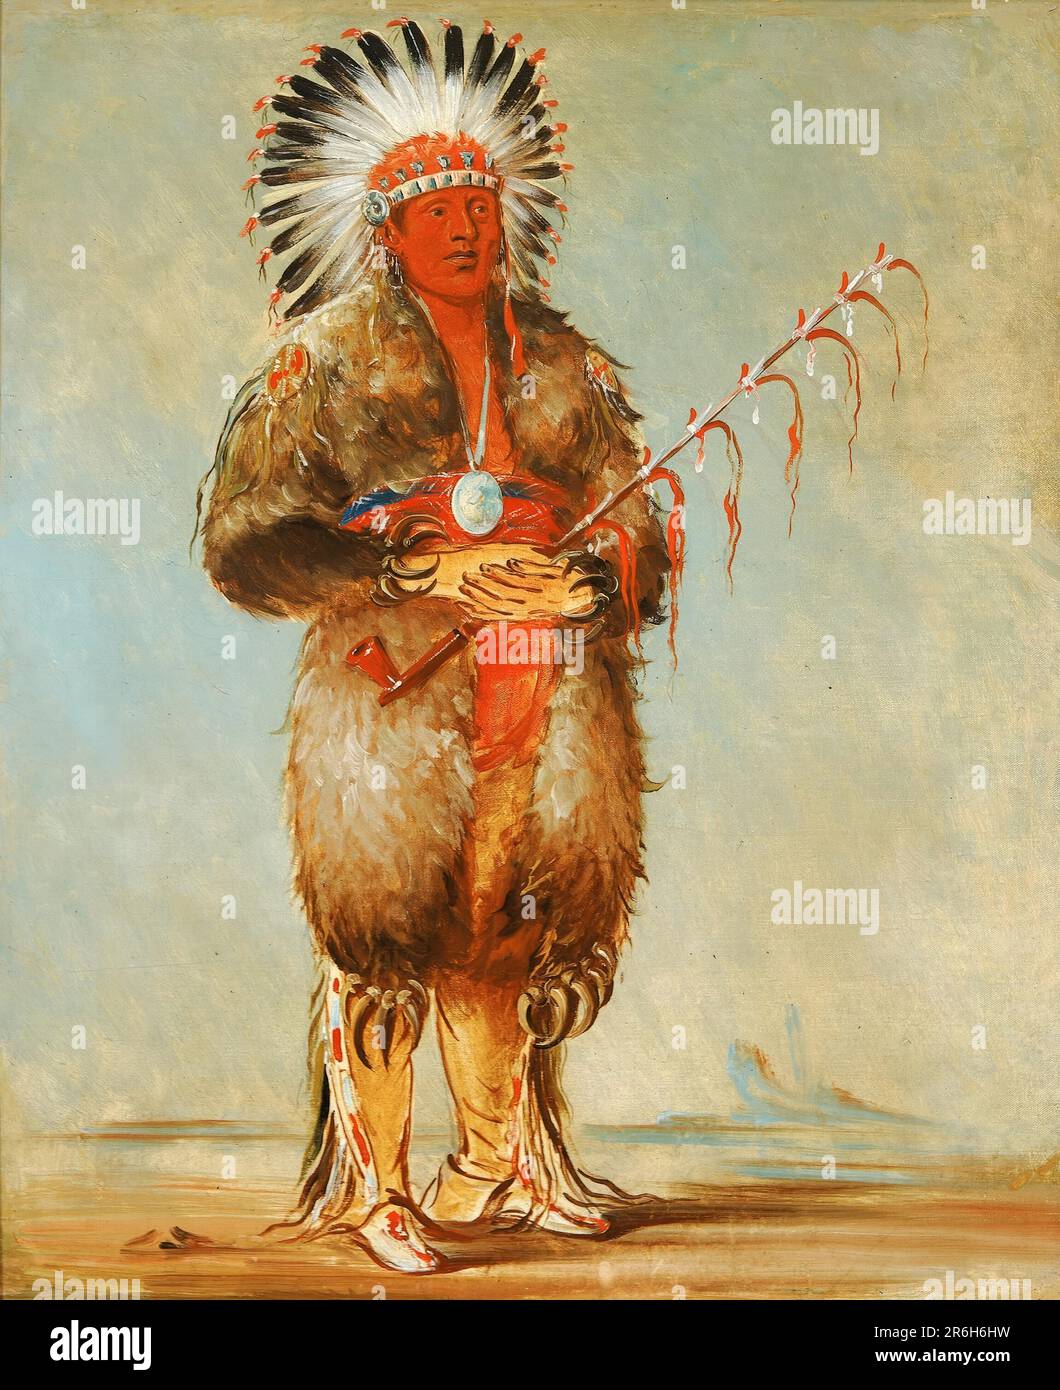 Ráw-no-way-wóh-krah, Loose Pipestem, a Brave. oil on canvas. Date: 1832. Museum: Smithsonian American Art Museum. Stock Photo